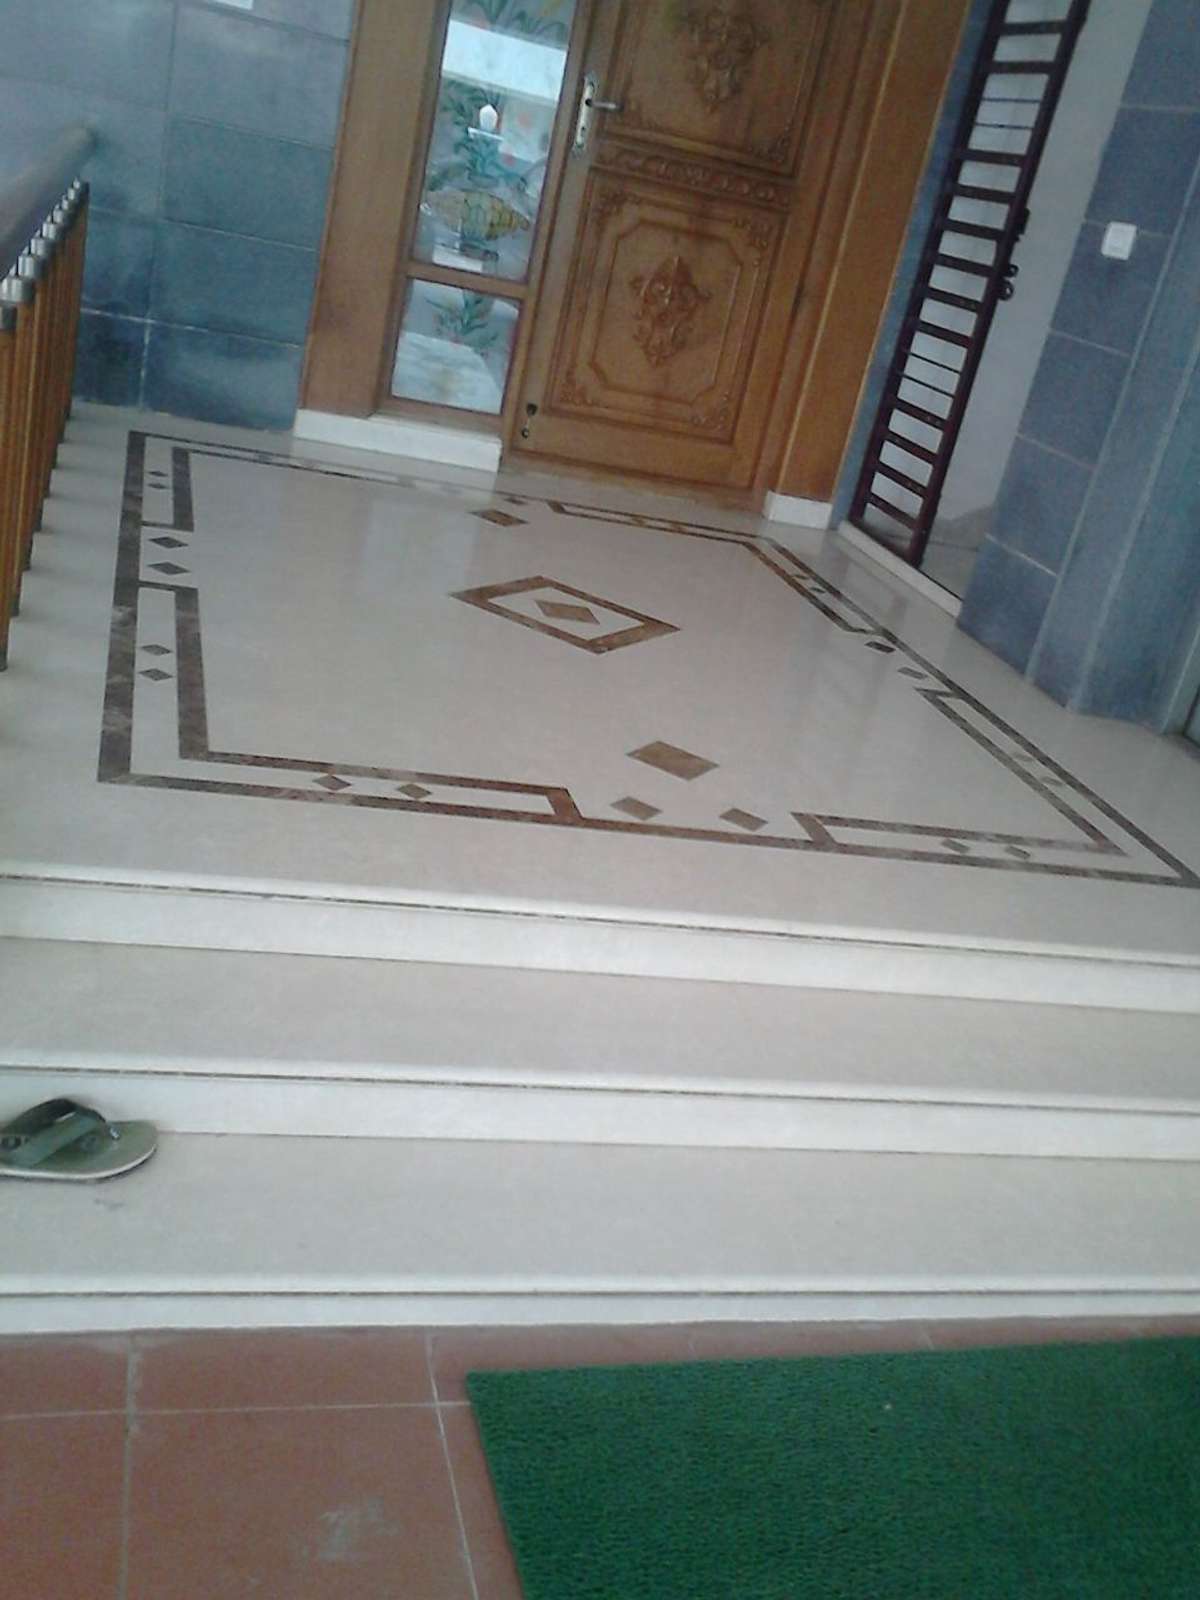 Designs by Contractor Muthu S, Palakkad | Kolo